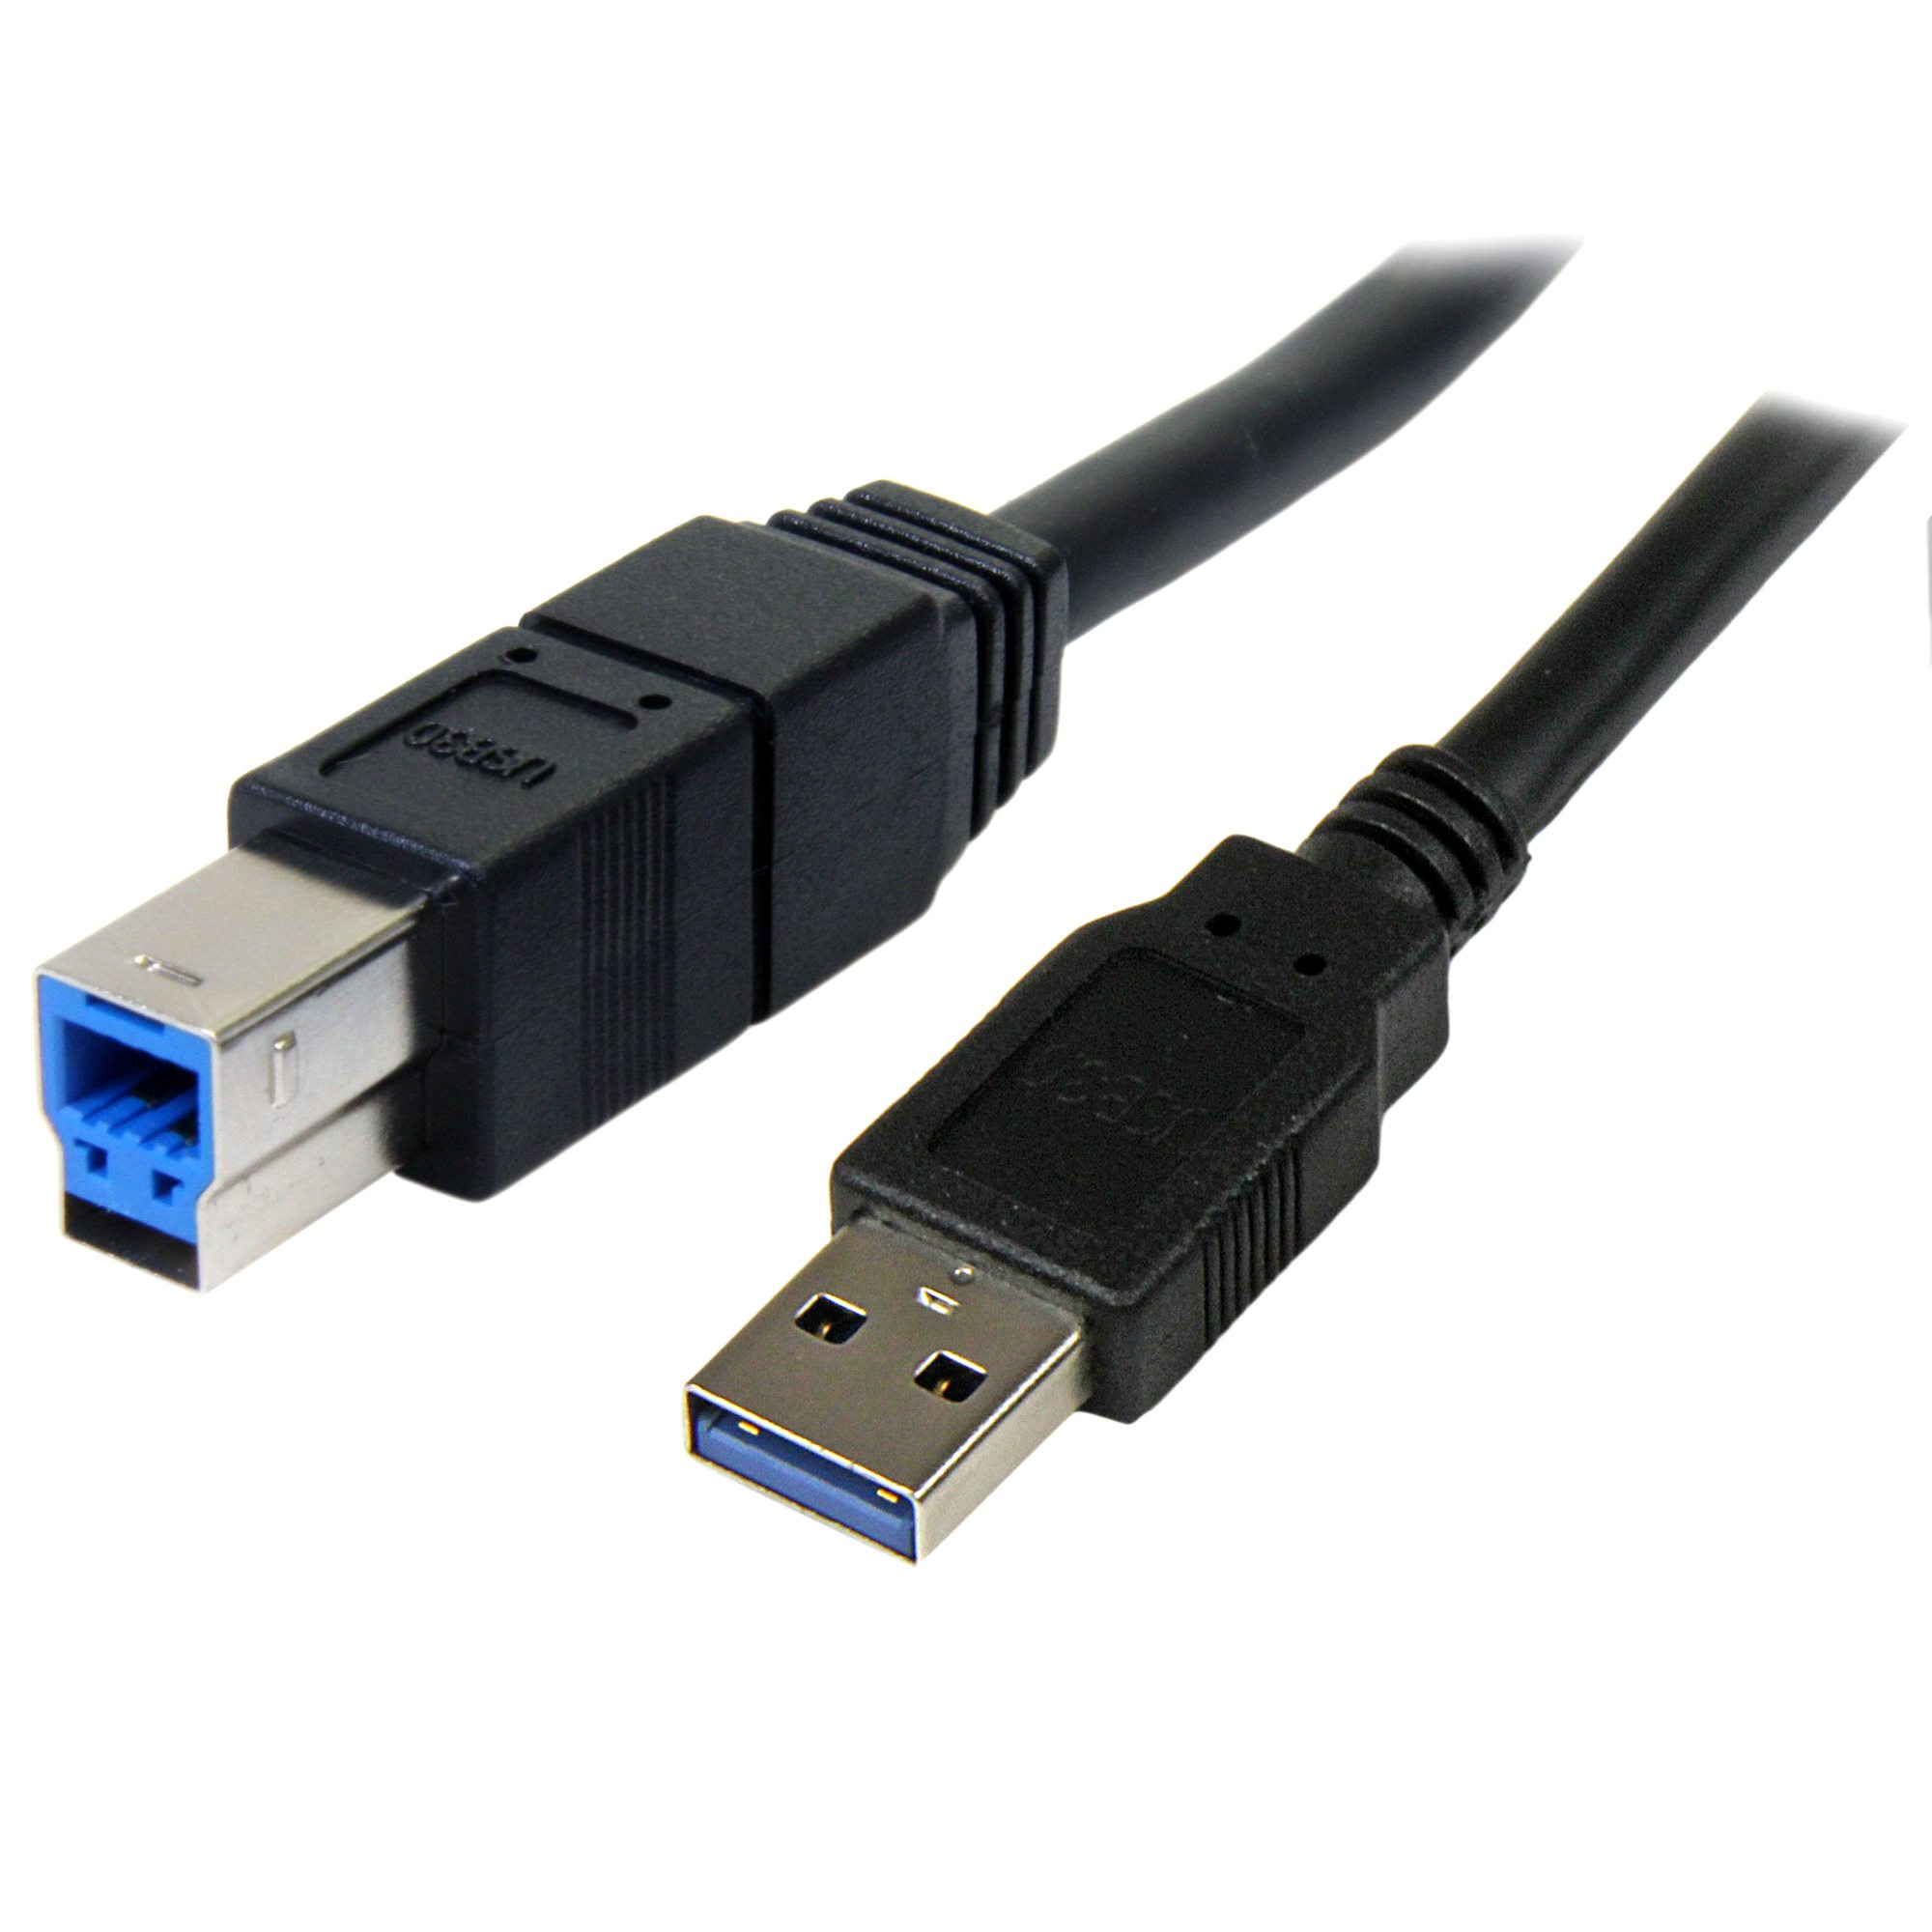 USB 3.0 SuperSpeed Extension Cable USB-A to USB-A, 3-ft.